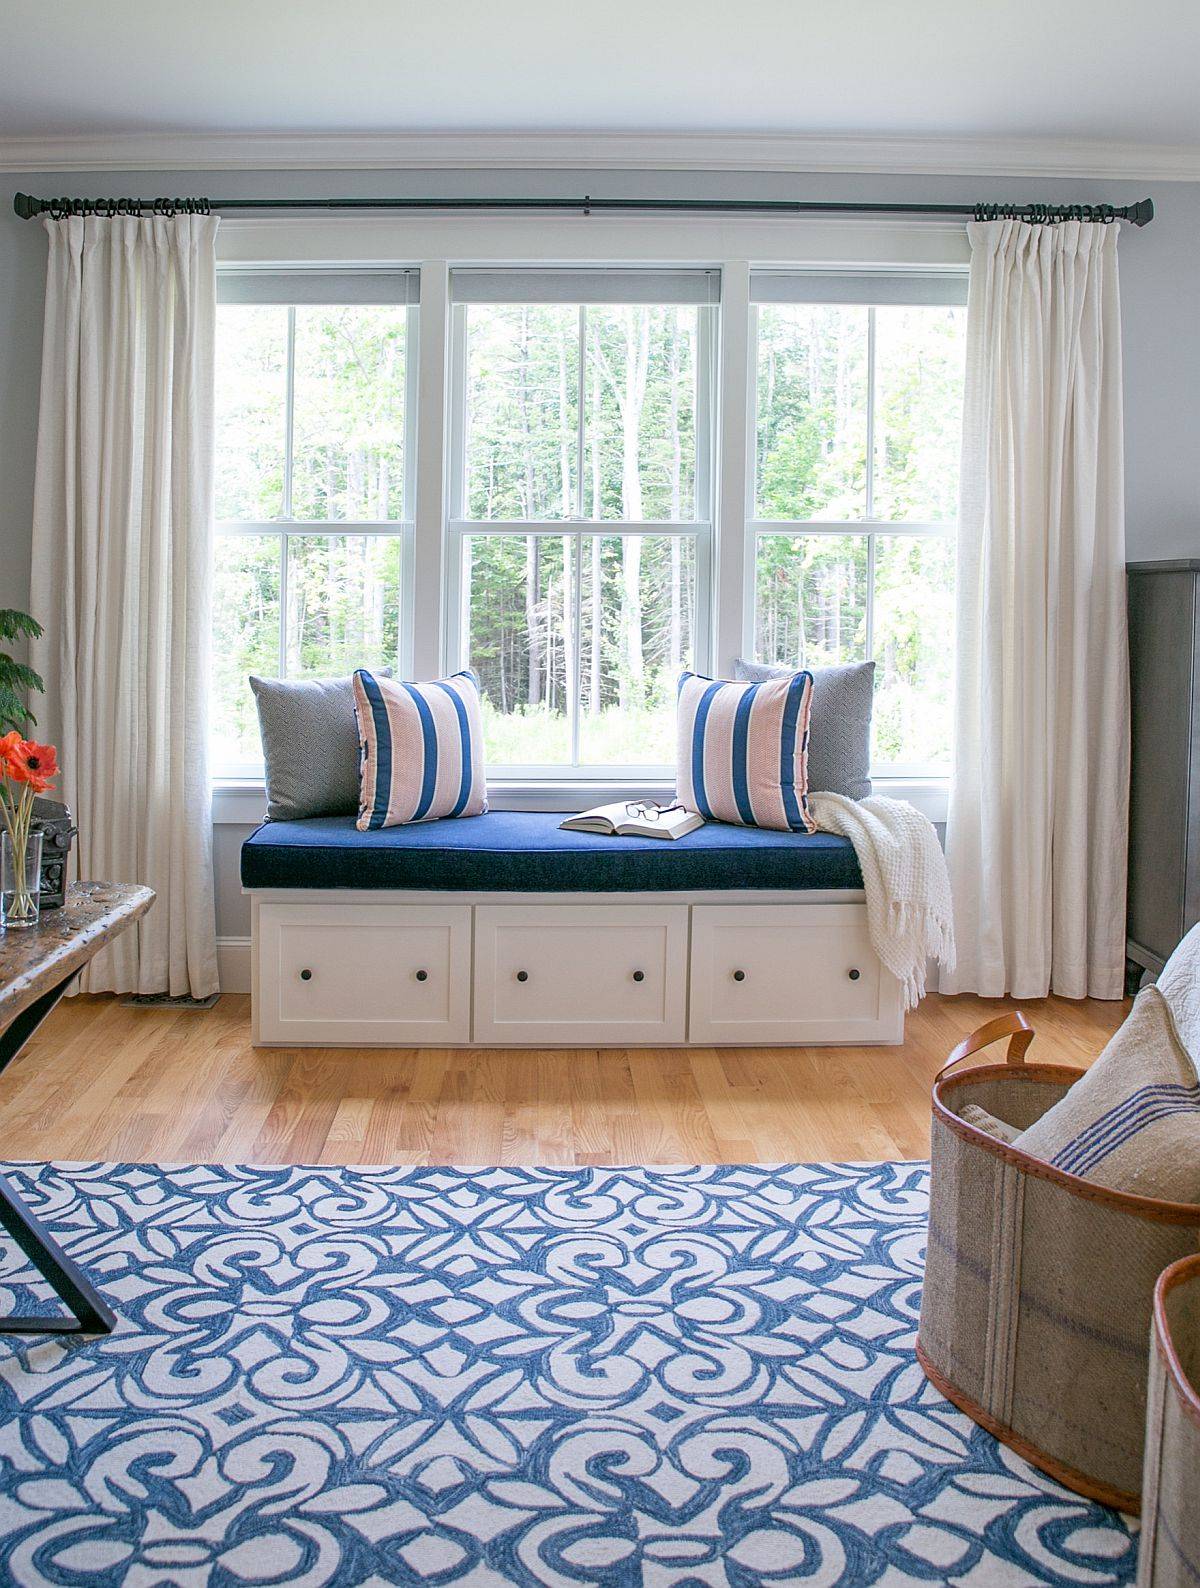 Your-custom-bedroom-window-seat-need-not-span-the-full-length-of-the-window-every-time-82599